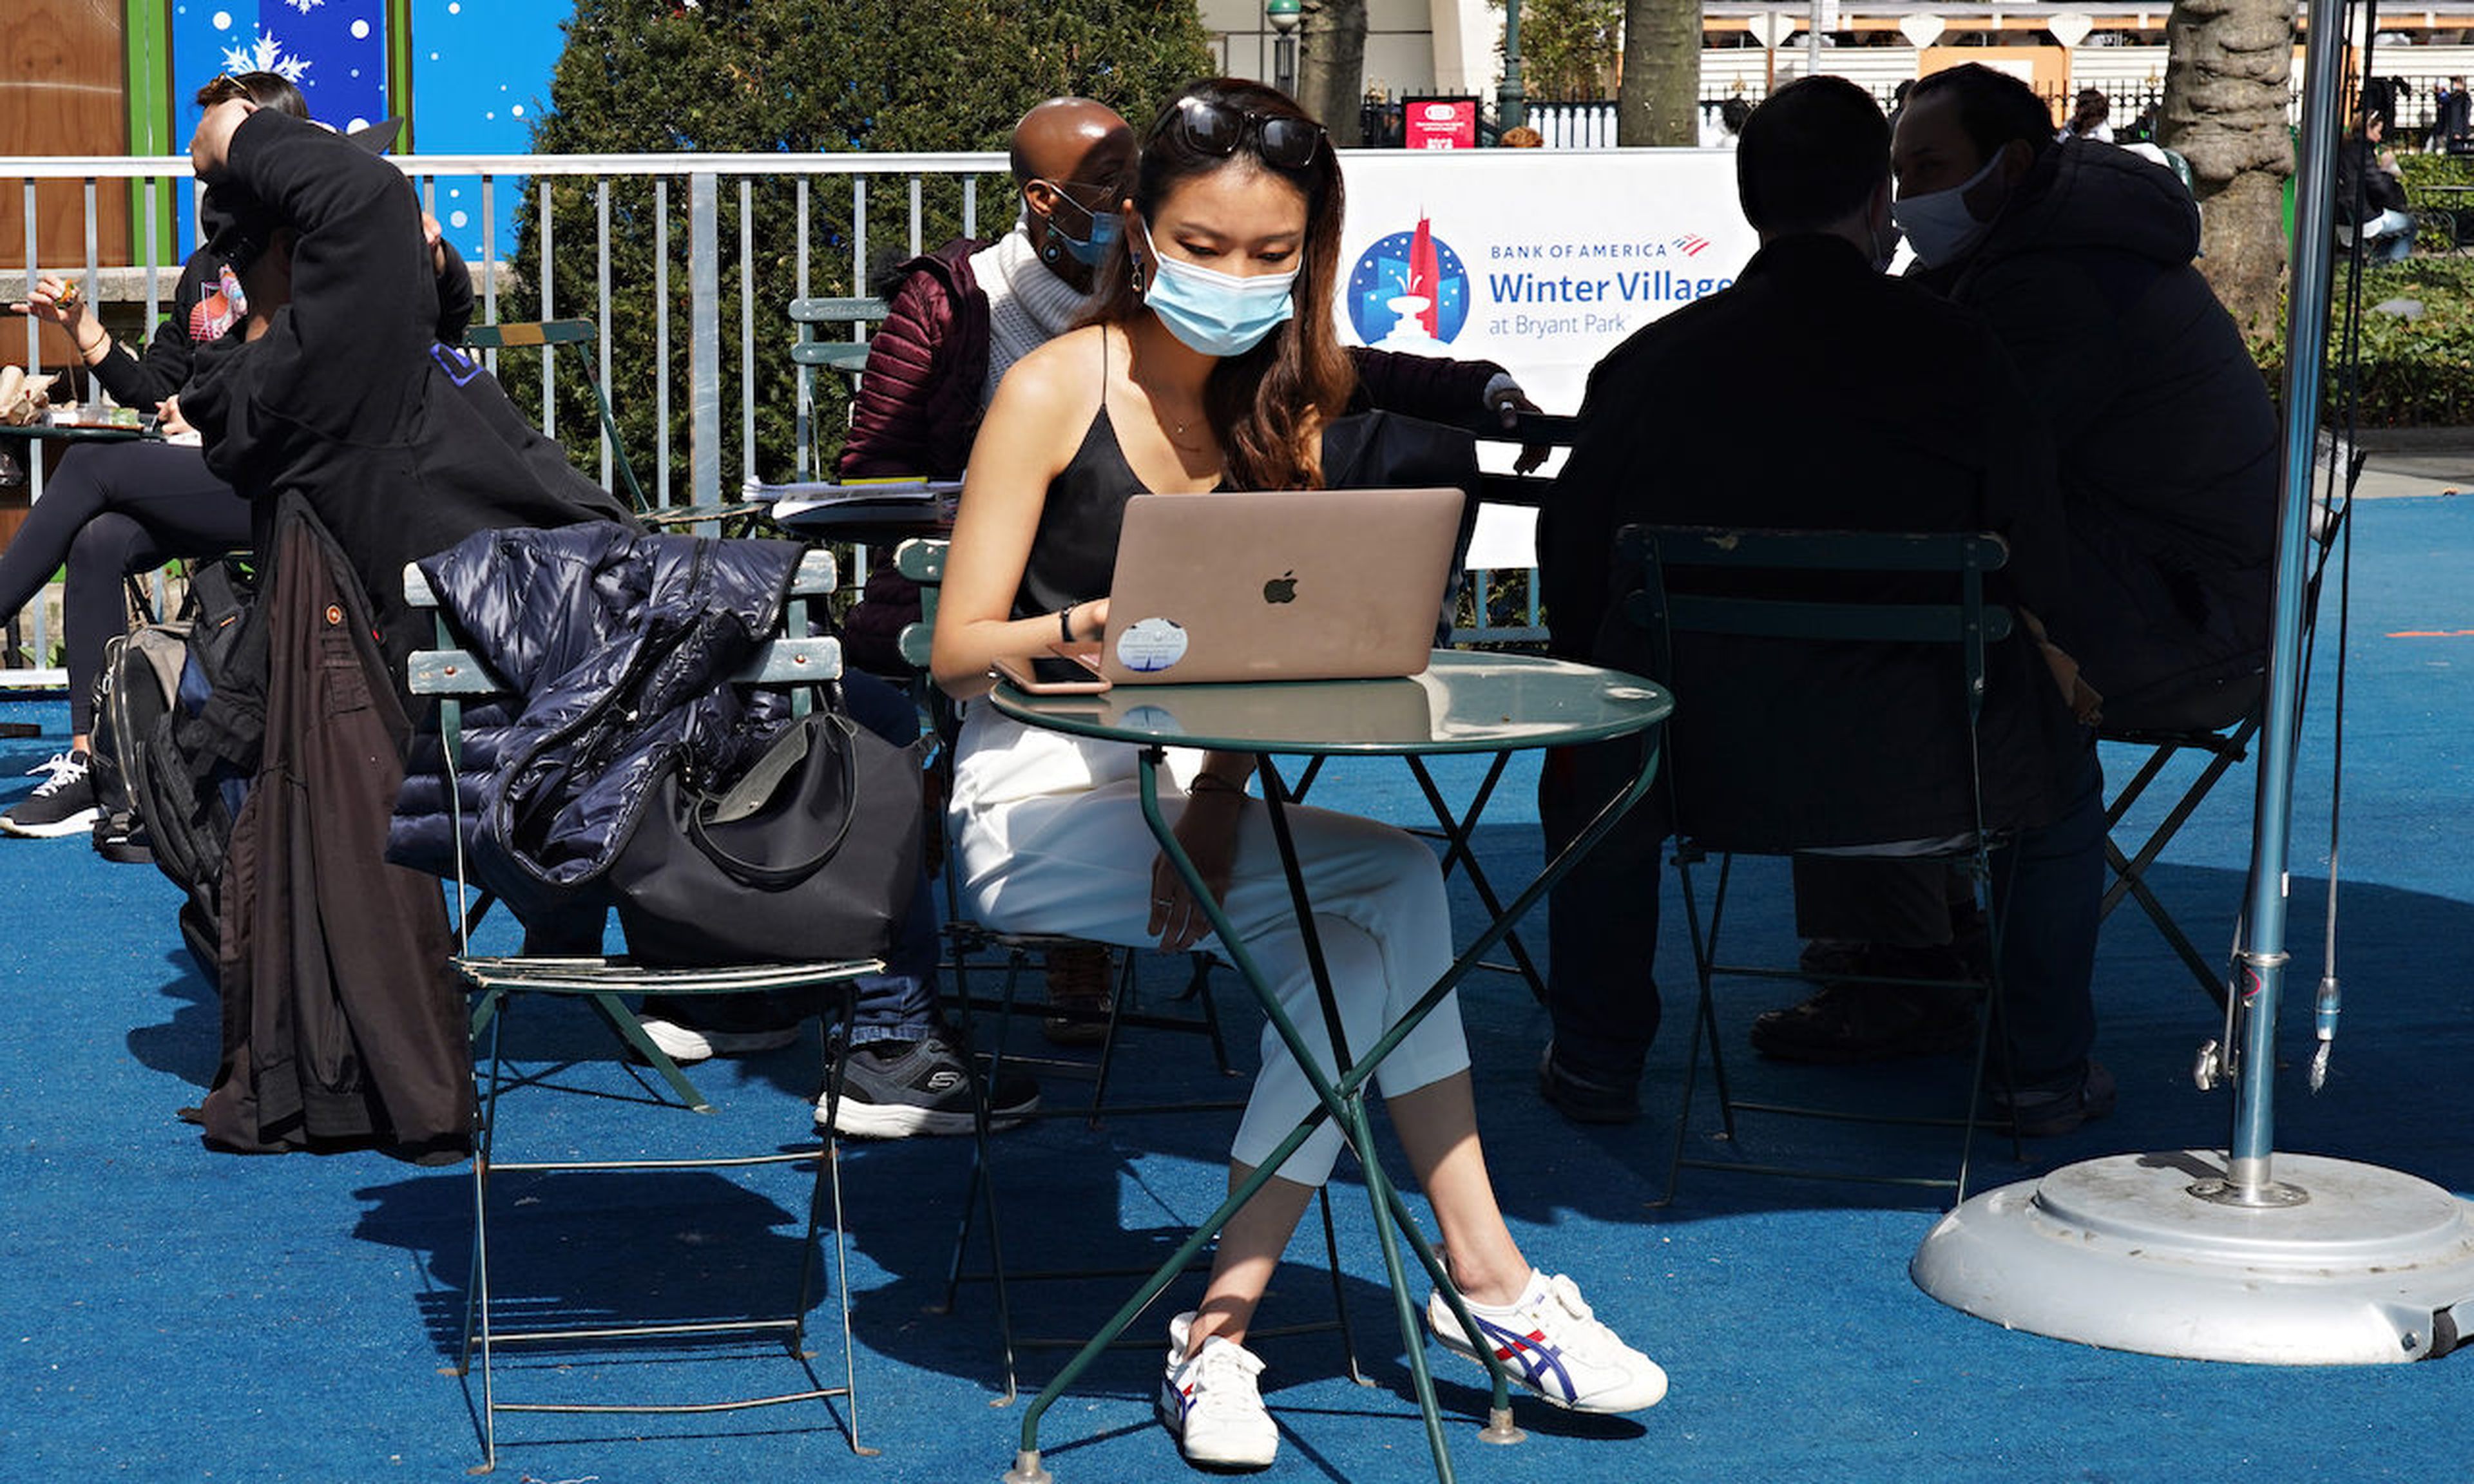 A person wearing a protective mask uses a laptop computer in Bryant Park on March 23, 2021 in New York City. (Photo by Cindy Ord/Getty Images)